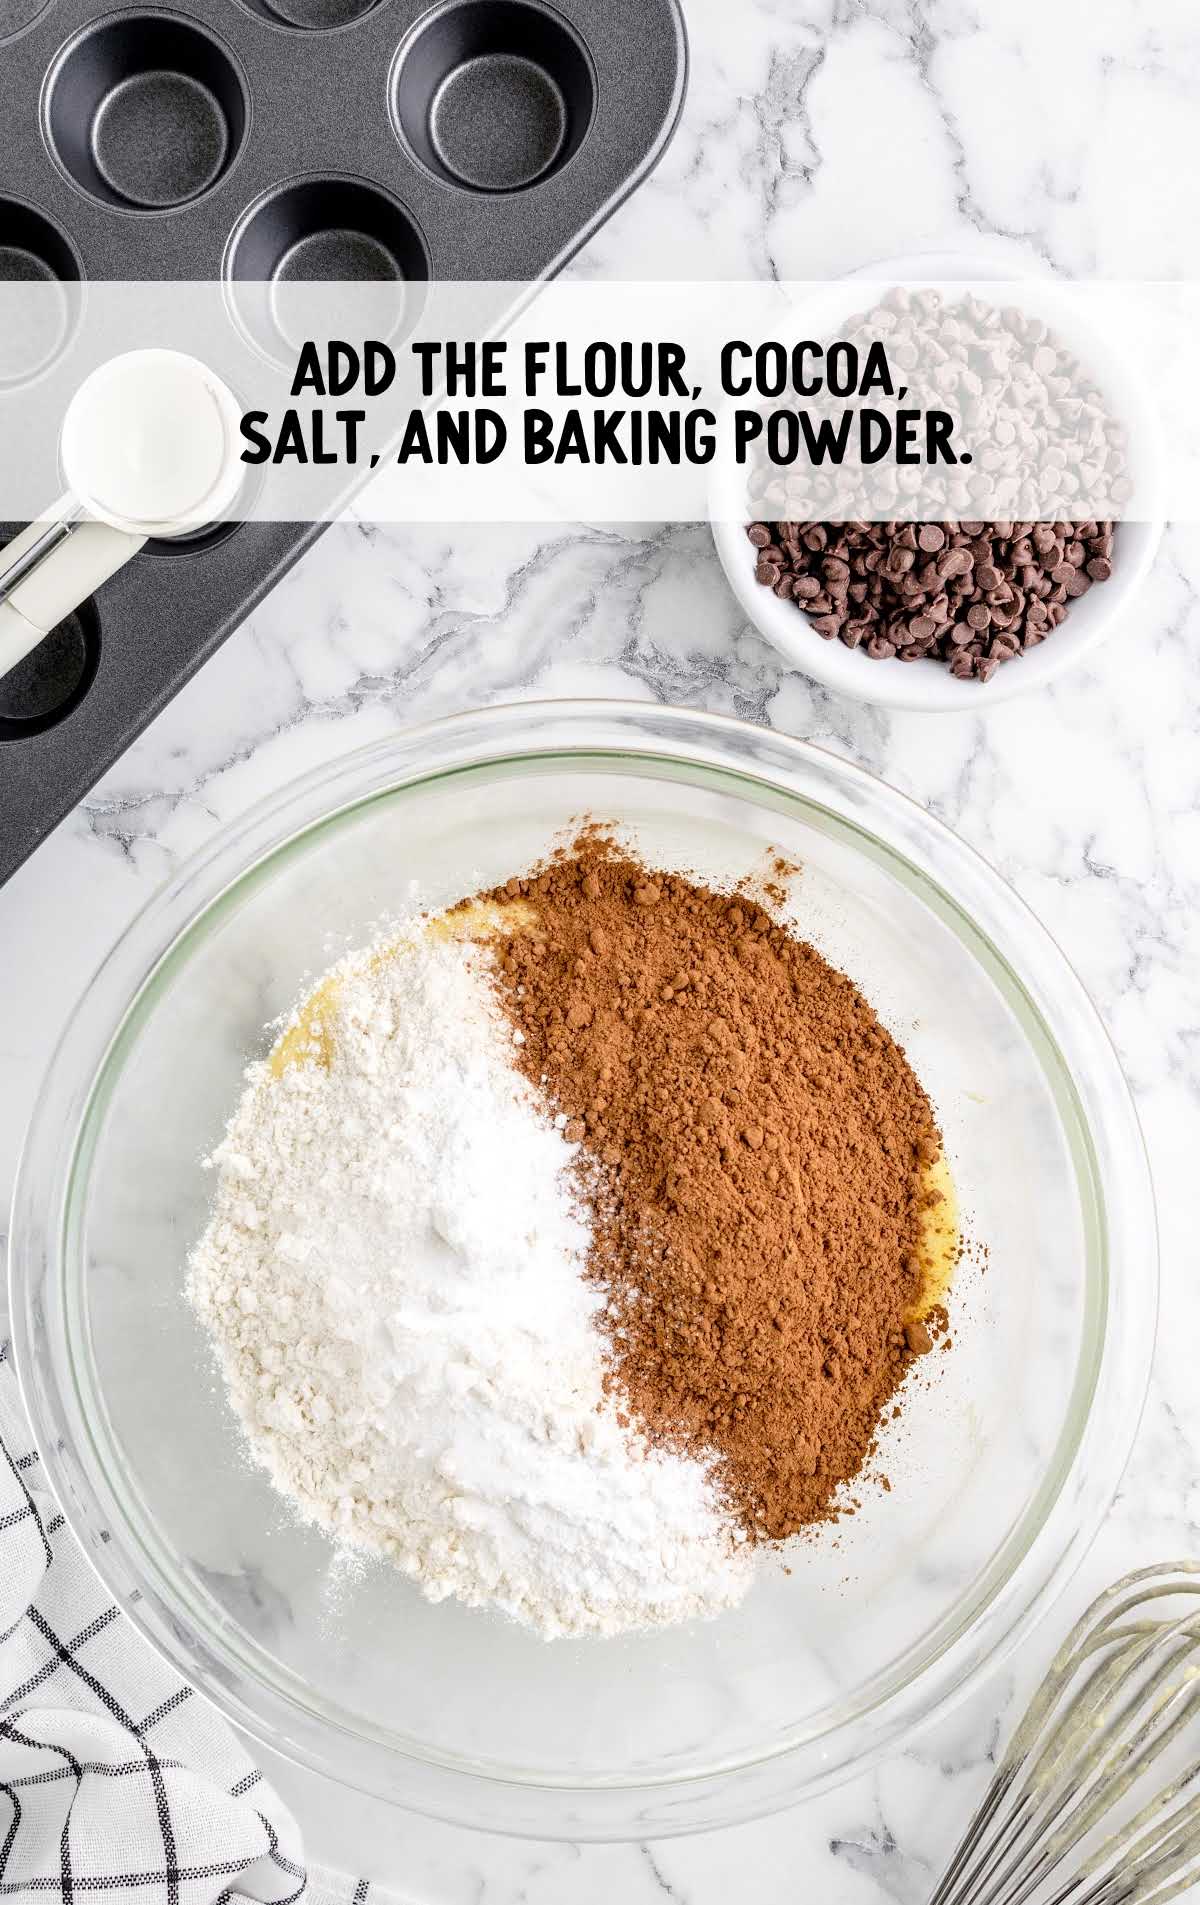 flour, cocoa powder, salt, and baking powder added to a bowl